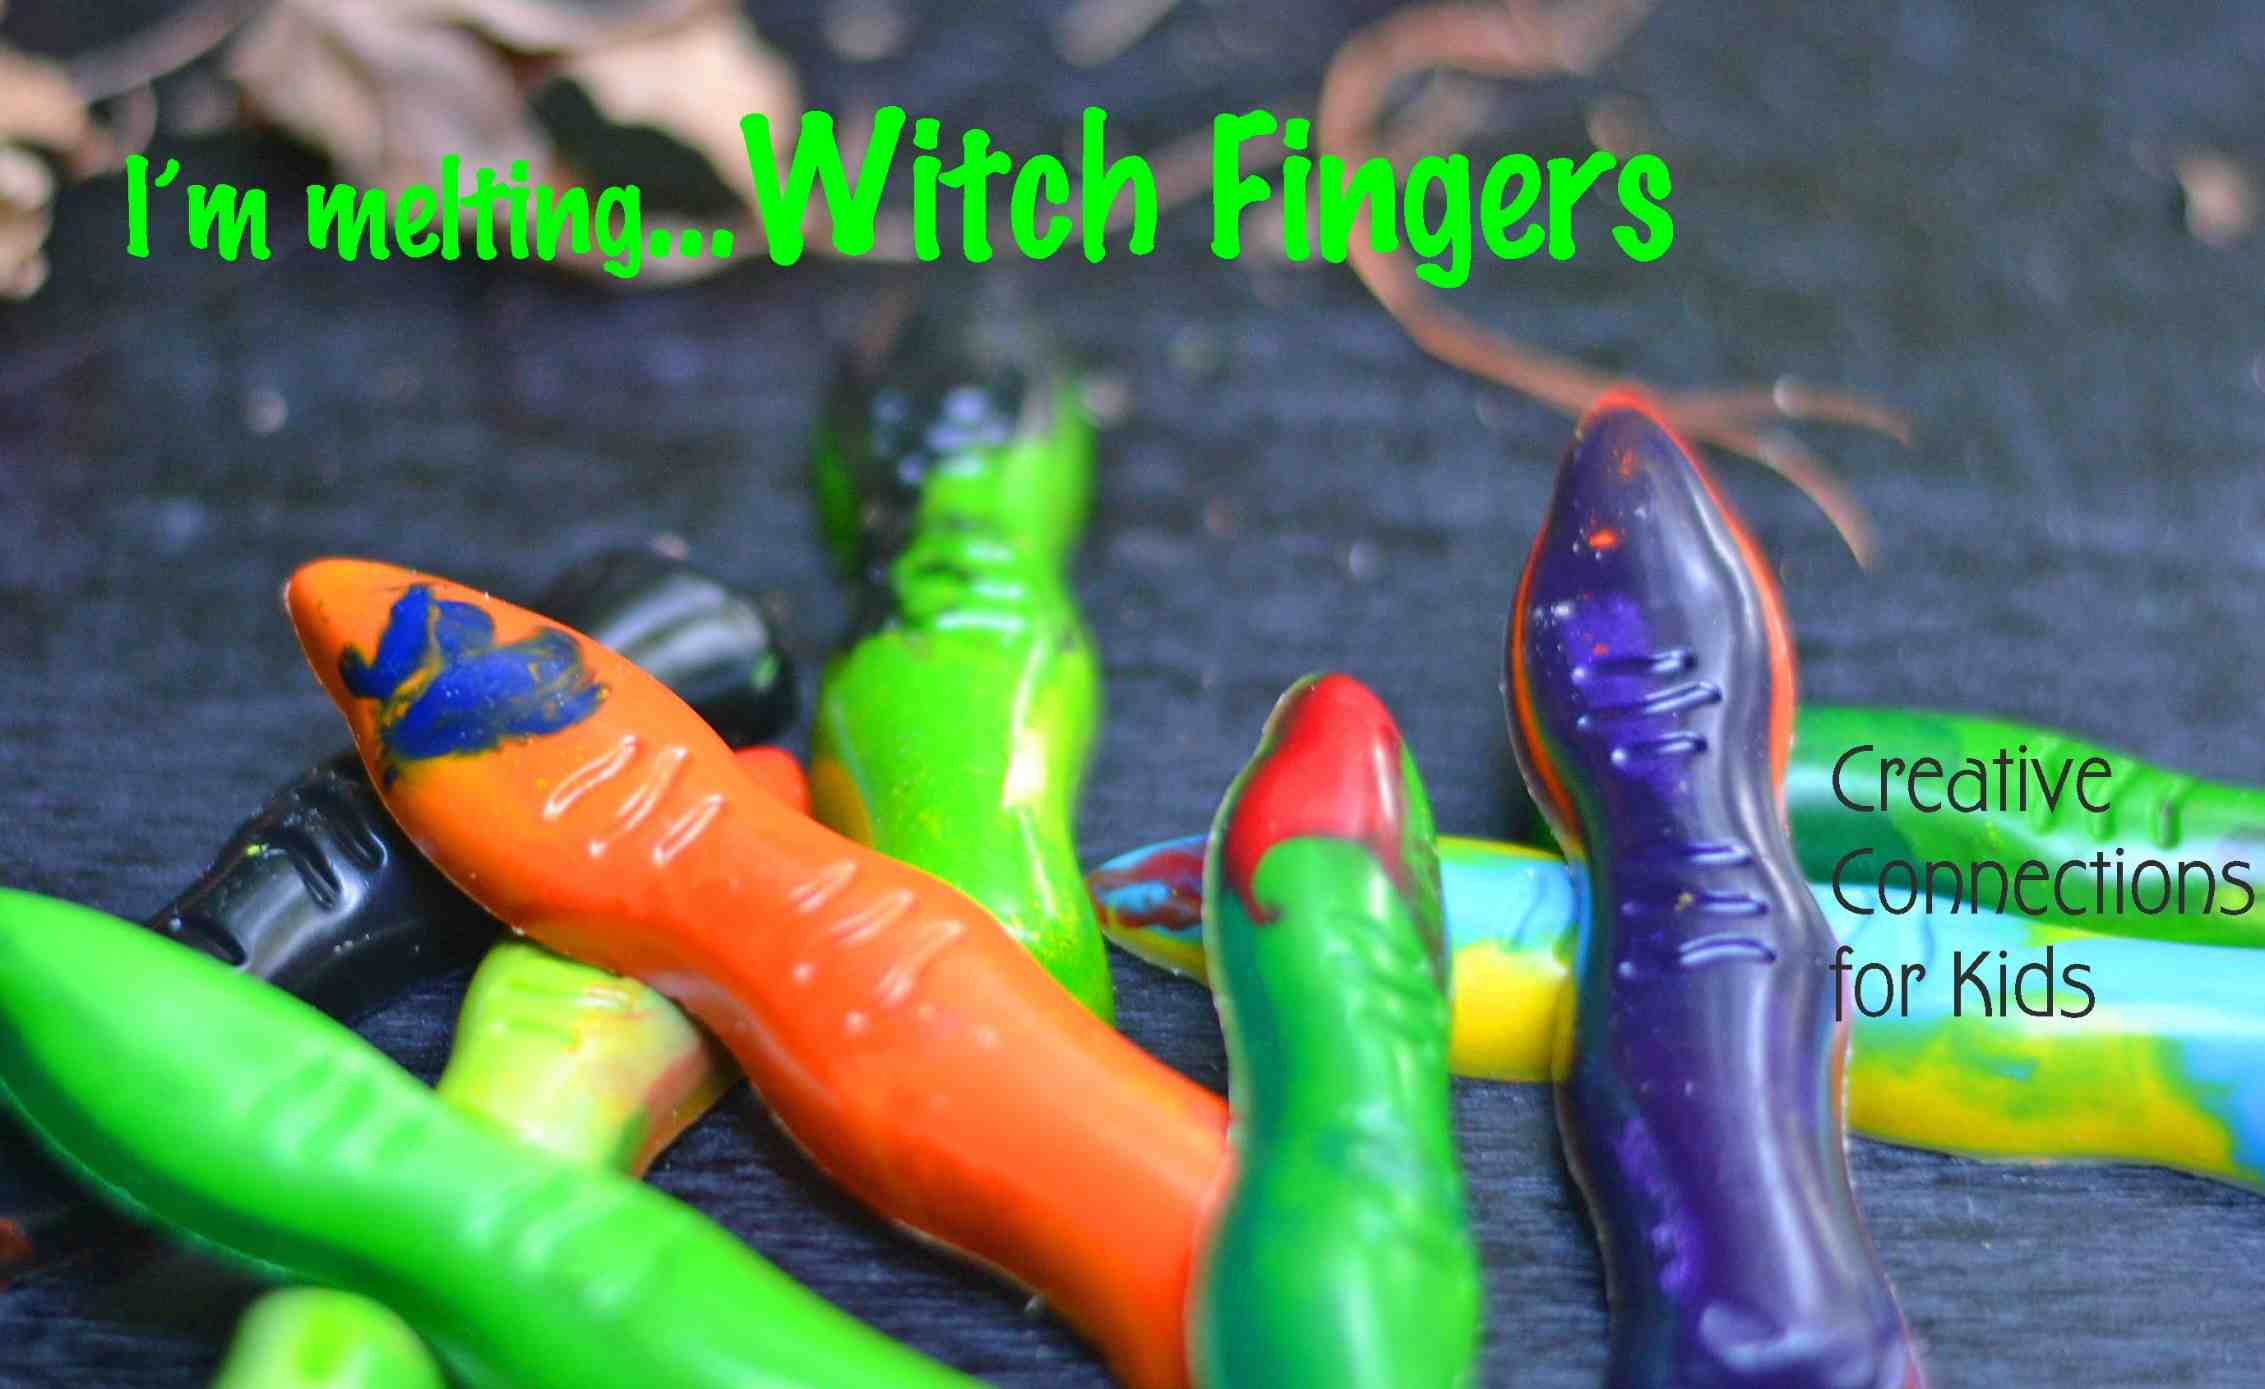 I’m melting…Witch Fingers! Creative Connections for Kids